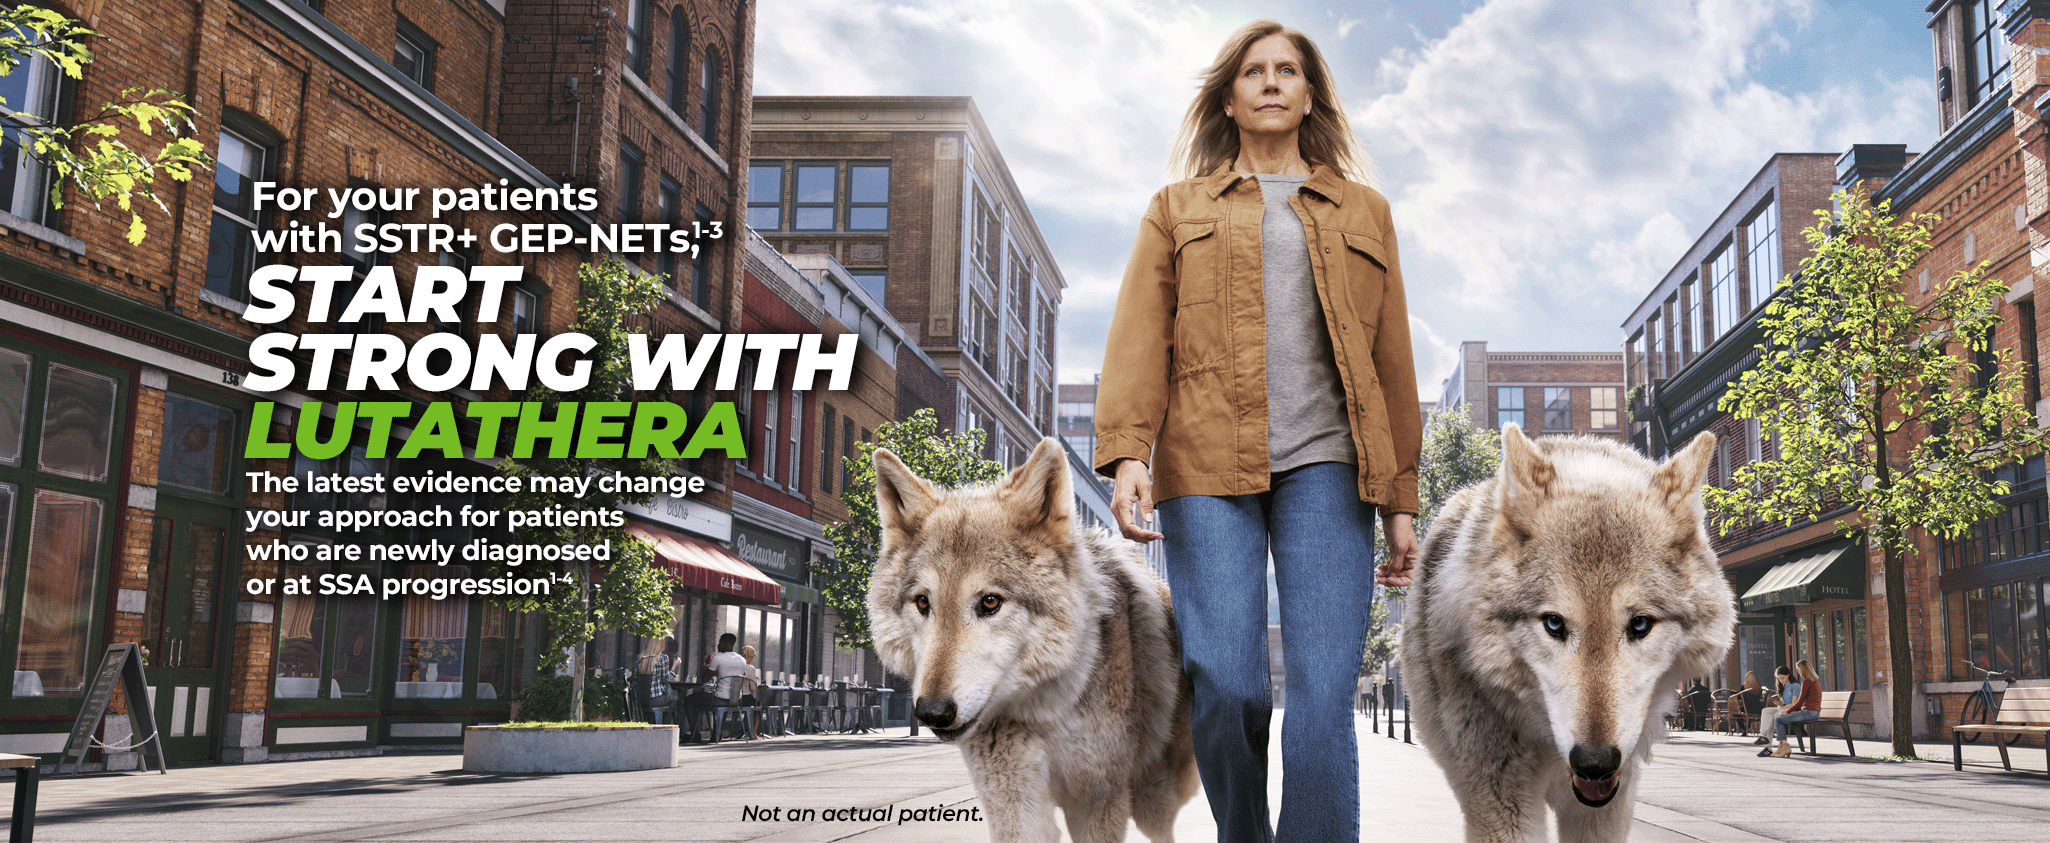 A woman walking confidently down a city street with two tan-colored wolves, one on each side of her, all facing forward. The text next to her reads "For your patients with SSTR+ GEP-NETs, START STRONG WITH LUTATHERA. Lutathera has practice-changing evidence for your patients who are newly diagnosed or at SSA progression. Not an actual patient."